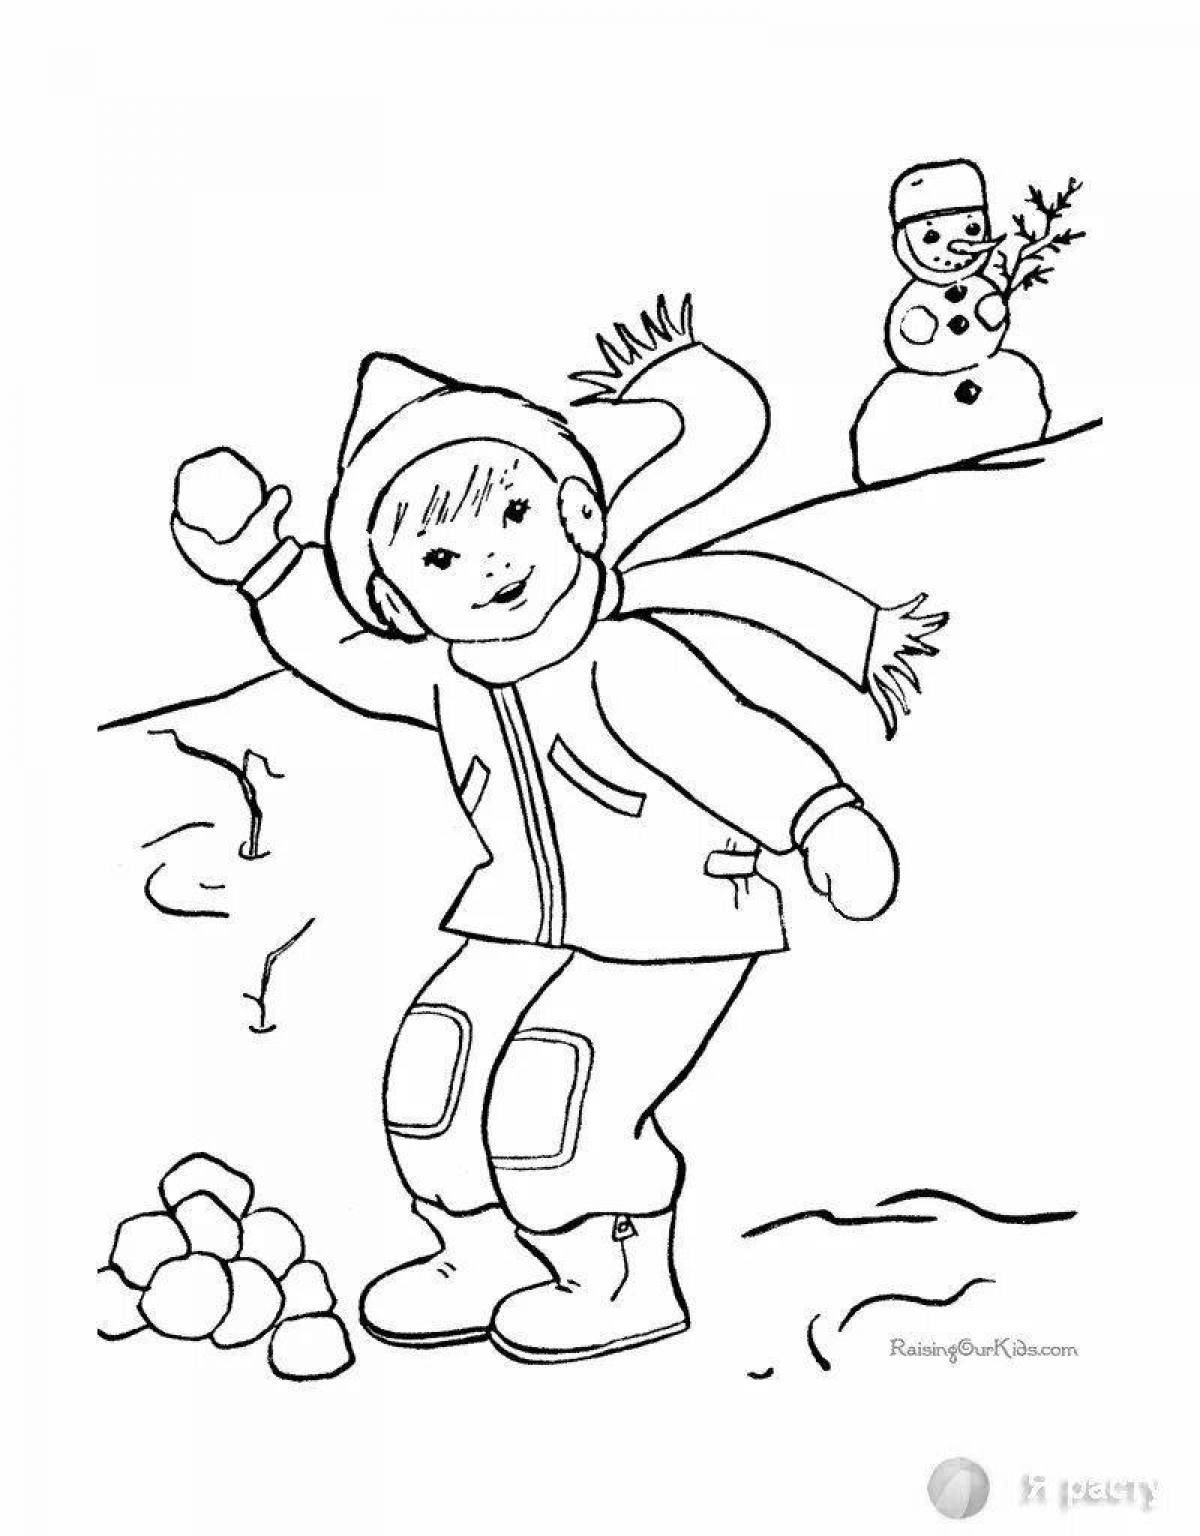 Exotic winter holidays coloring book for kids